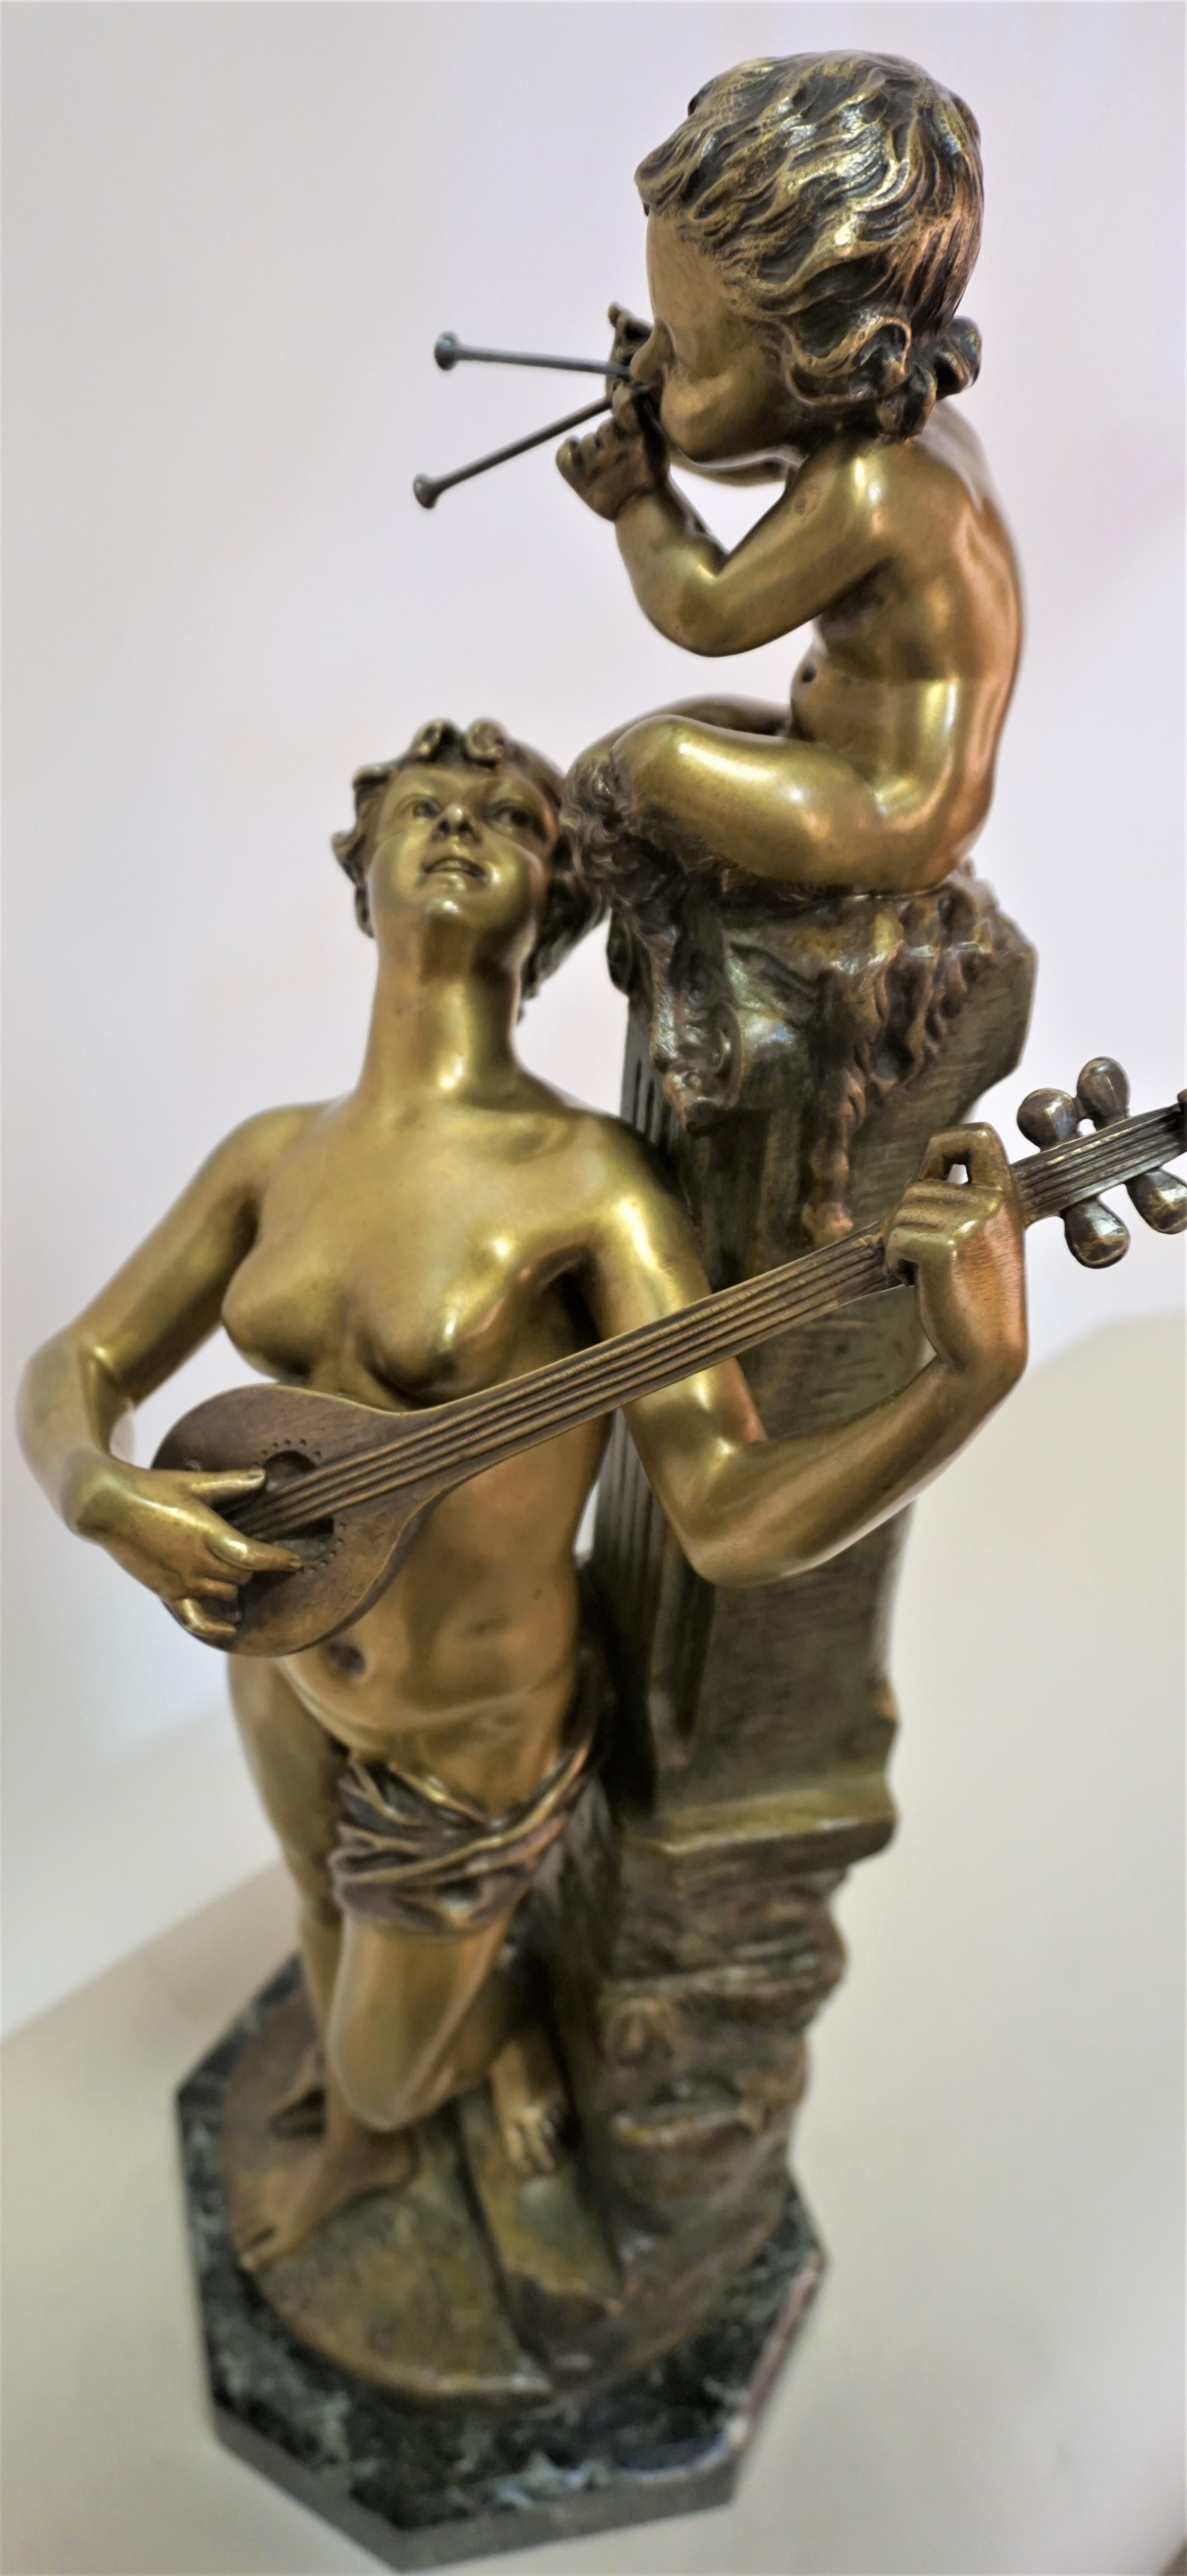 Bronze Bacchante Plying Music with Young Satyr by Aristide De Ranieri 1865-1929 For Sale 4